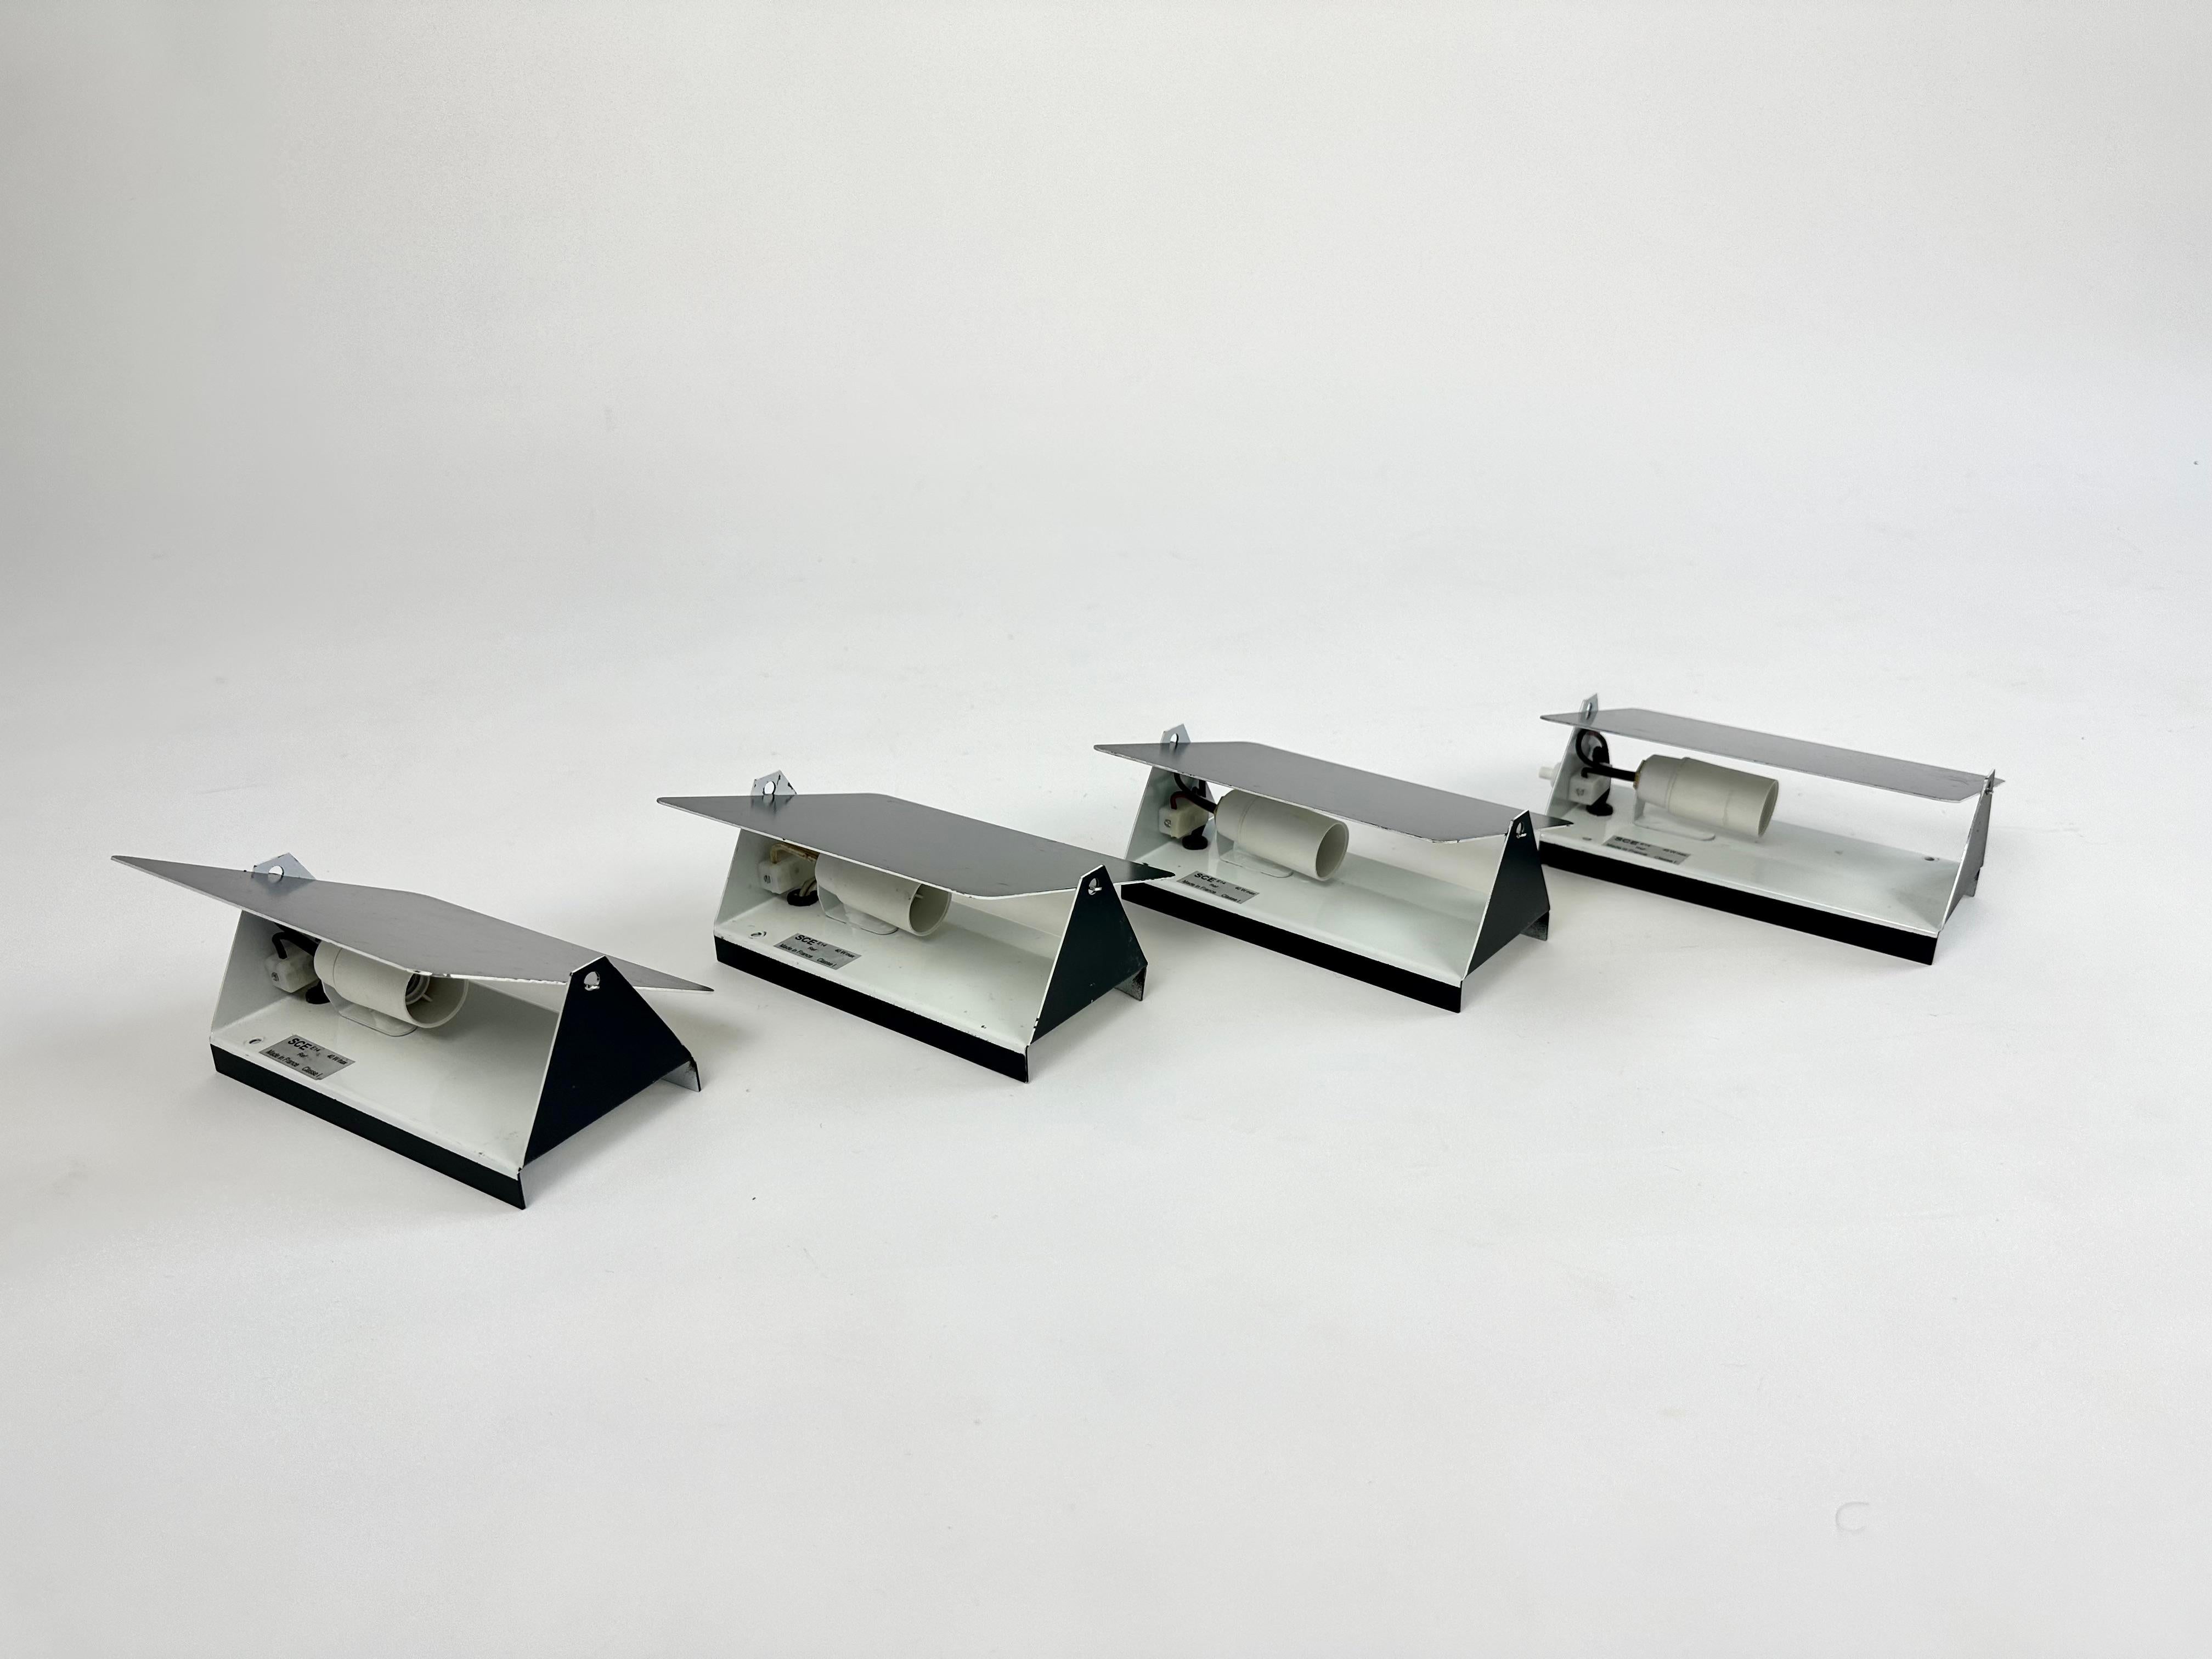 Set of 4 wall lights, model CP1 designed by Charlotte Perriand for Steph Simon.

Sourced from an estate clearance in the Haute Savoie region of France.

The set are 1970s editions.

Very good condition, no damage or dents. Signs of use in the way of